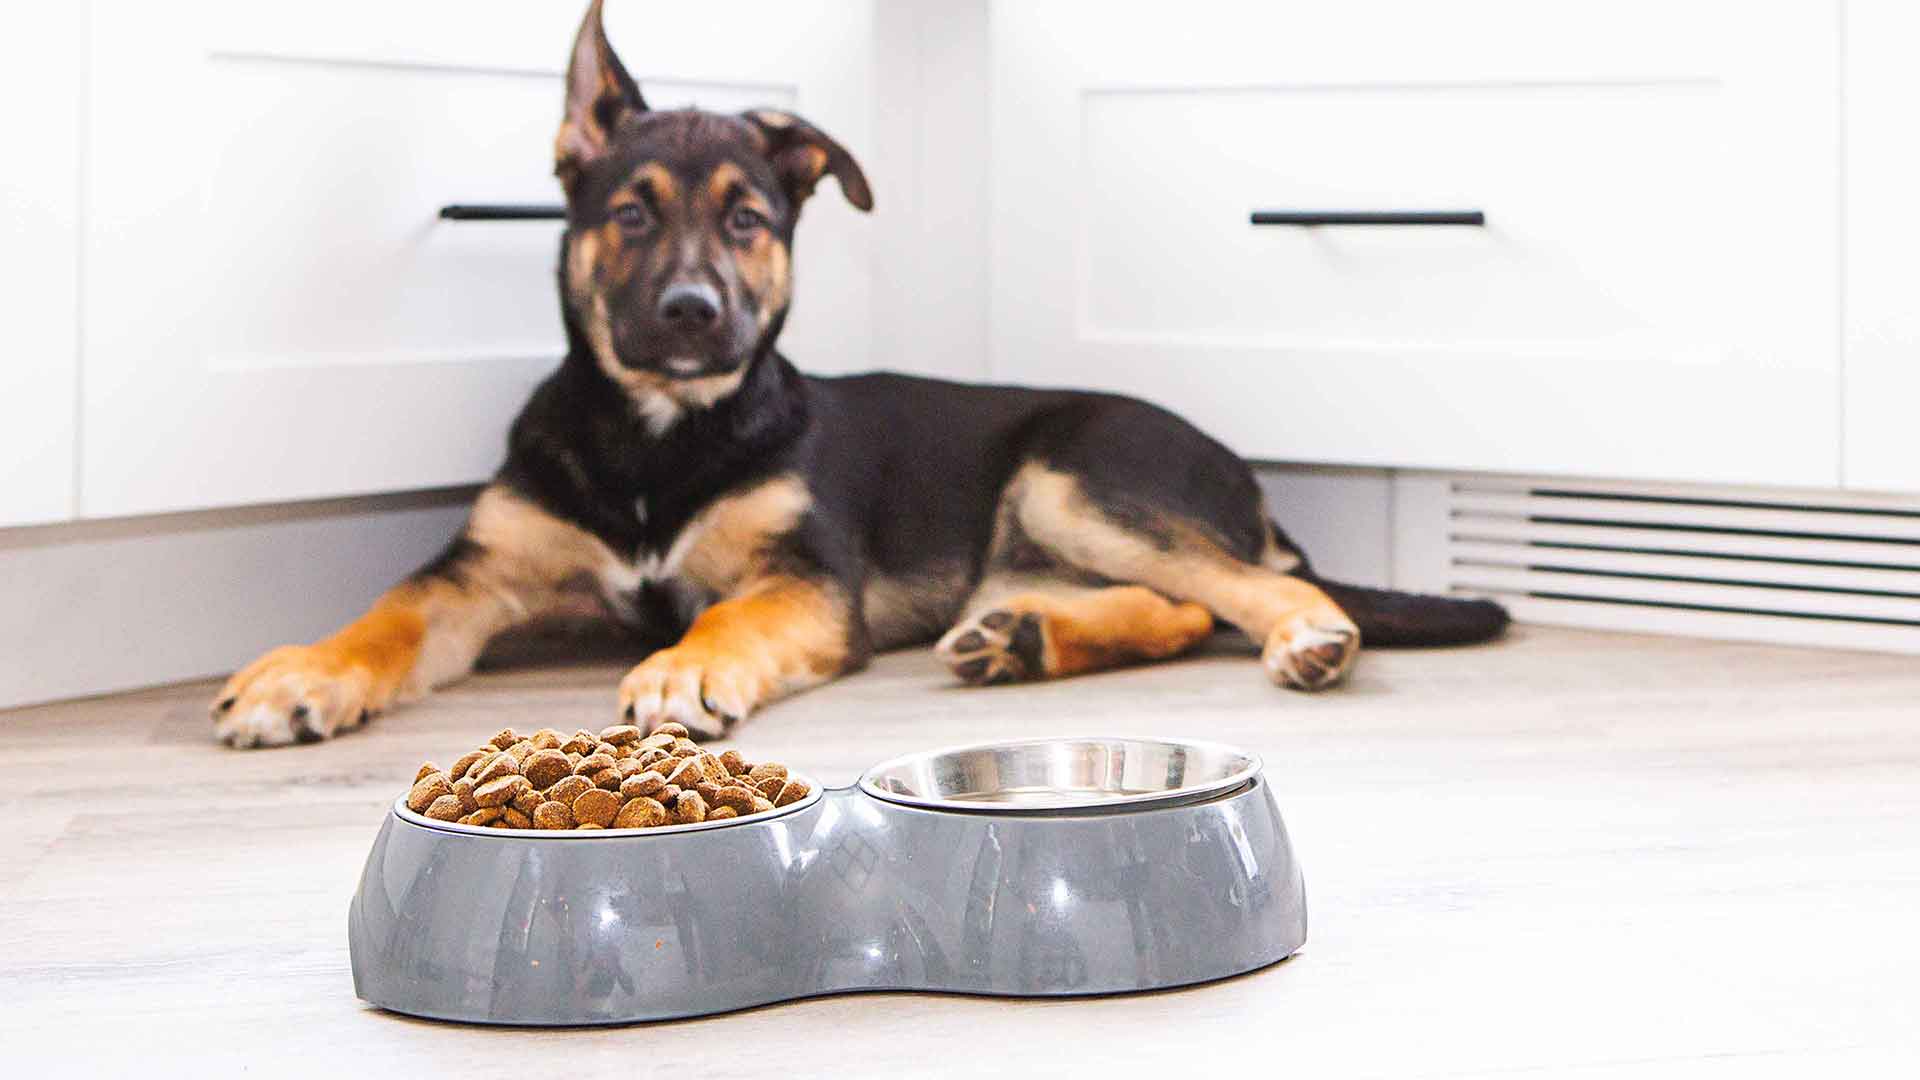 A German shepherd puppy laying next to a bowl of water and dog food